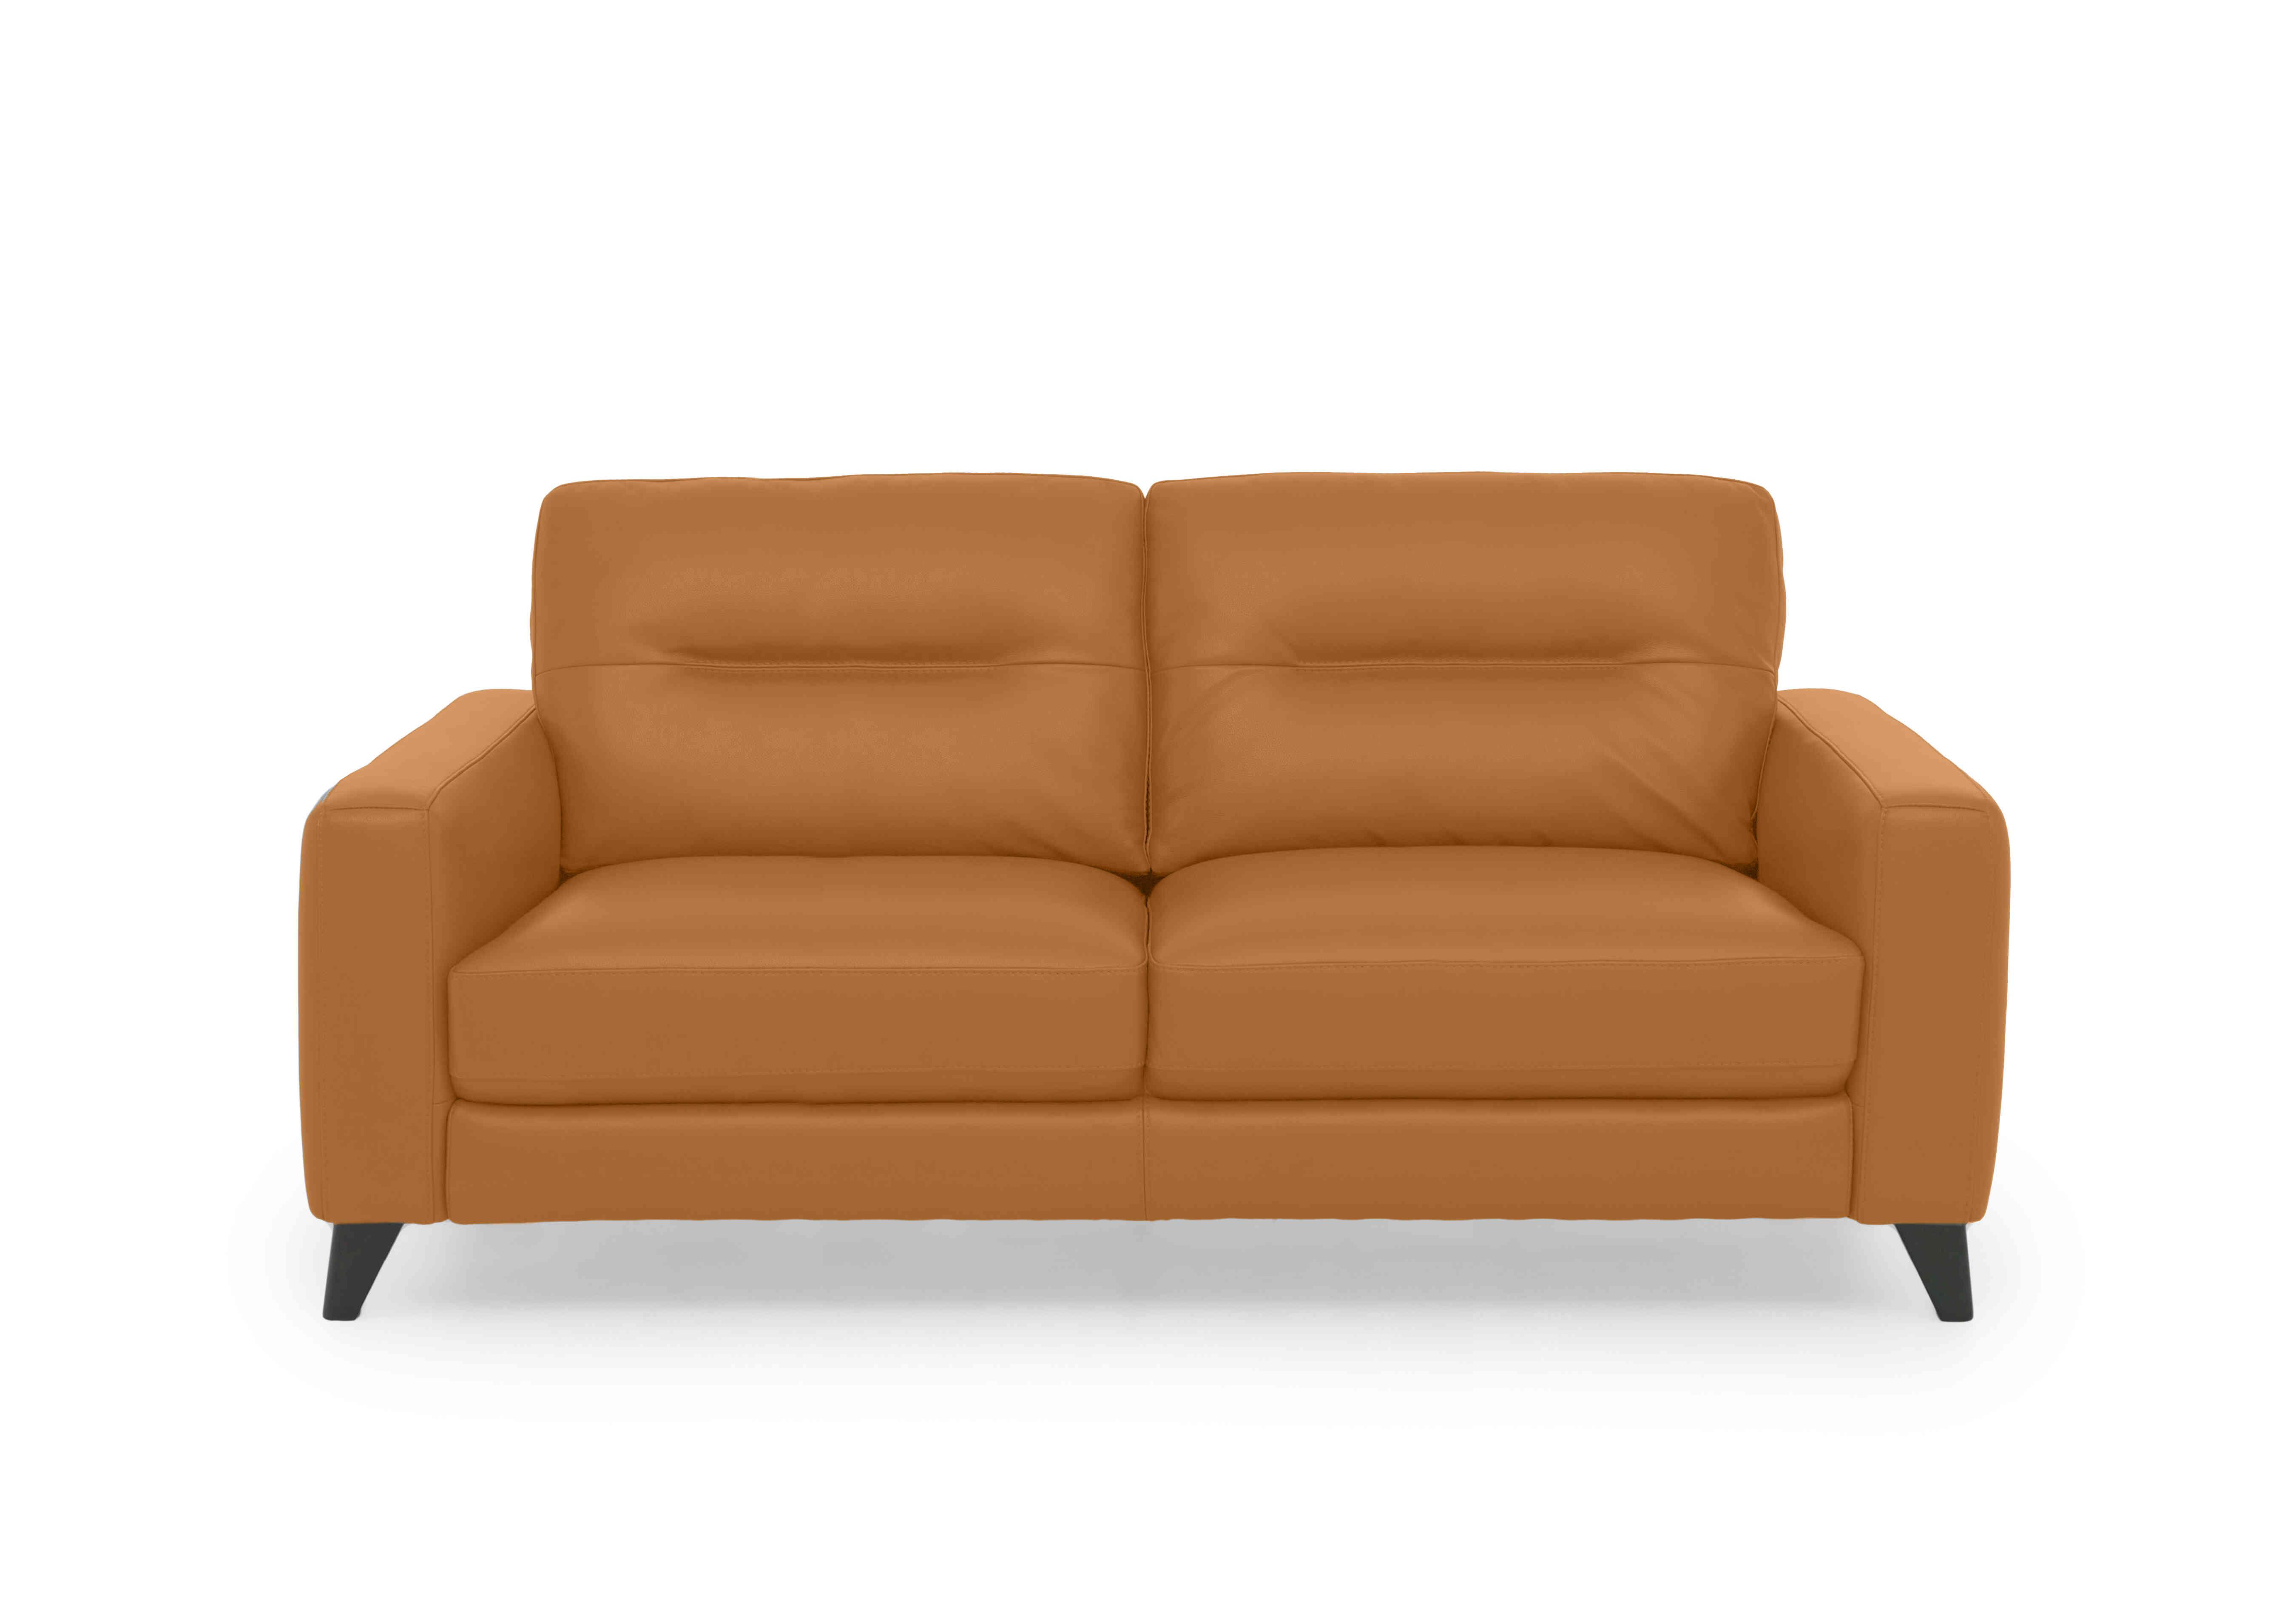 Jules 3 Seater Leather Sofa in Bv-335e Honey Yellow on Furniture Village